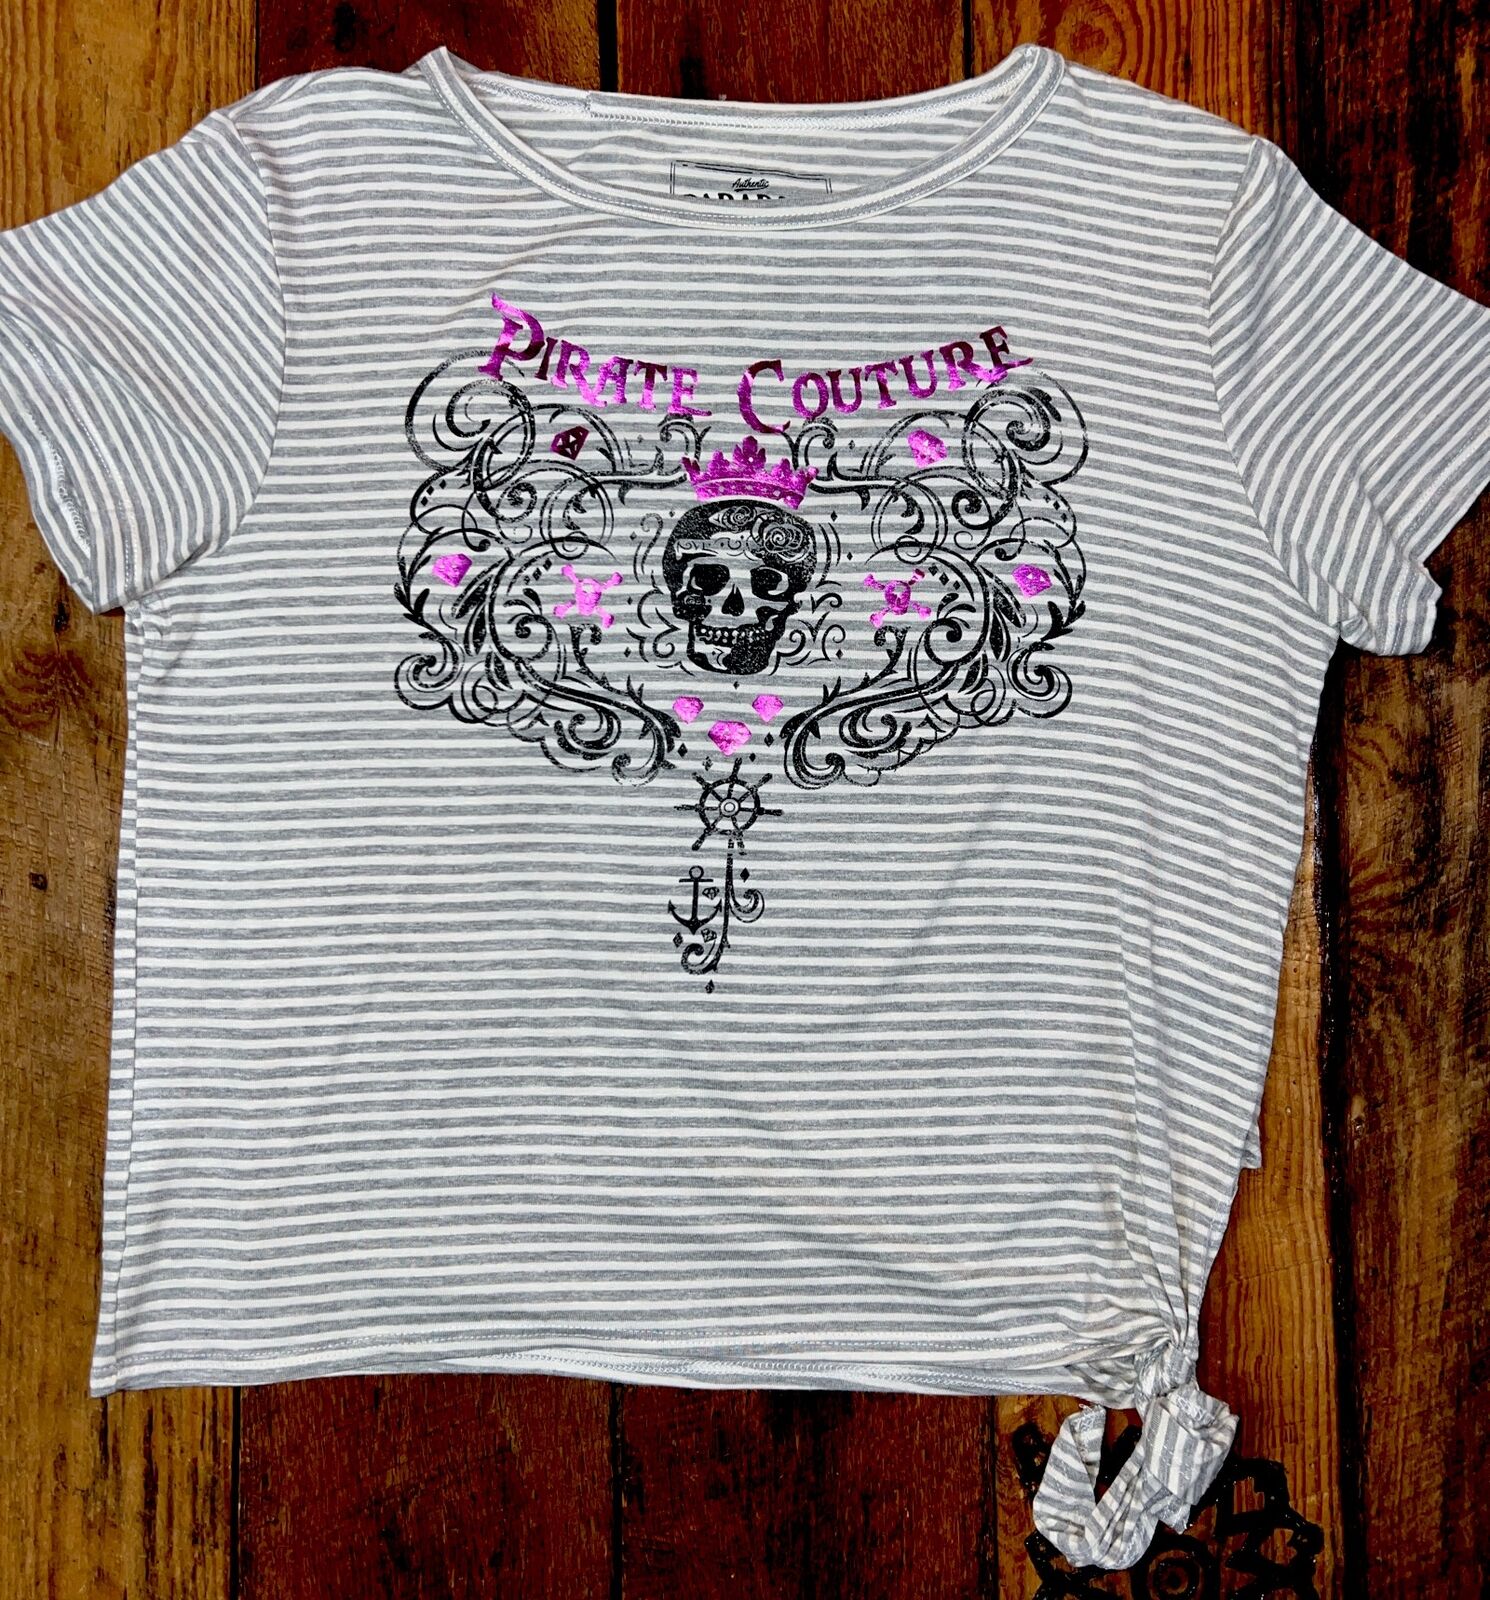 Large DISNEY PARKS Pirate Couture Ladies WWD Pirates Of The Caribbean Shirt NWOT